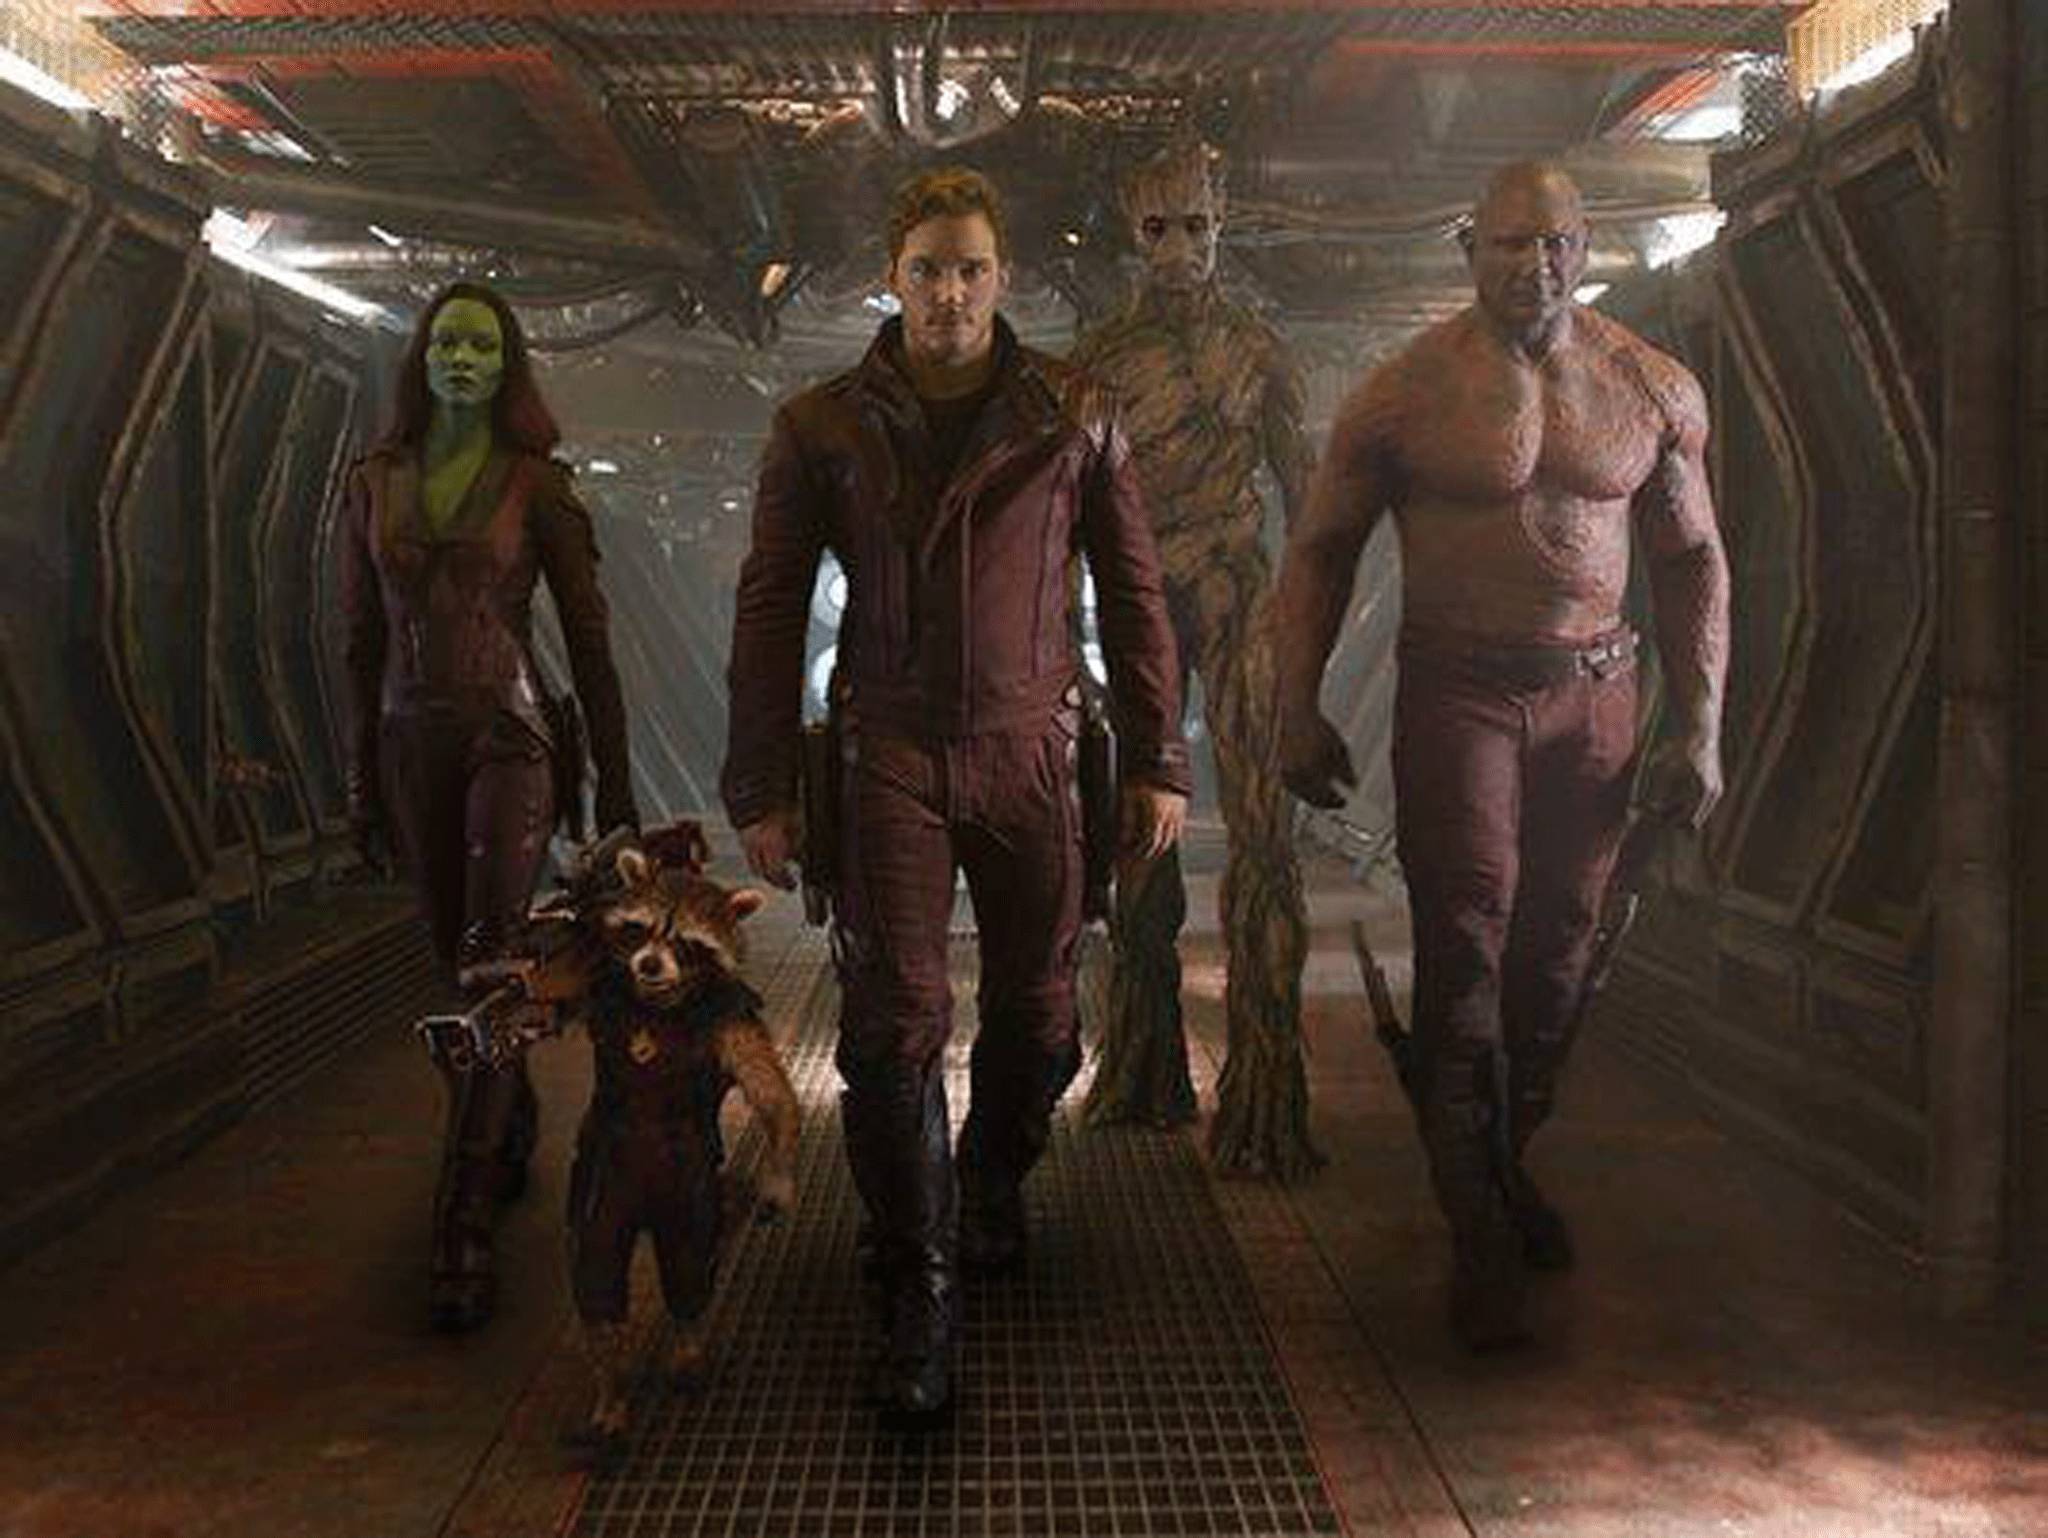 Guardians of the Galaxy trailer Three images released ahead of launch